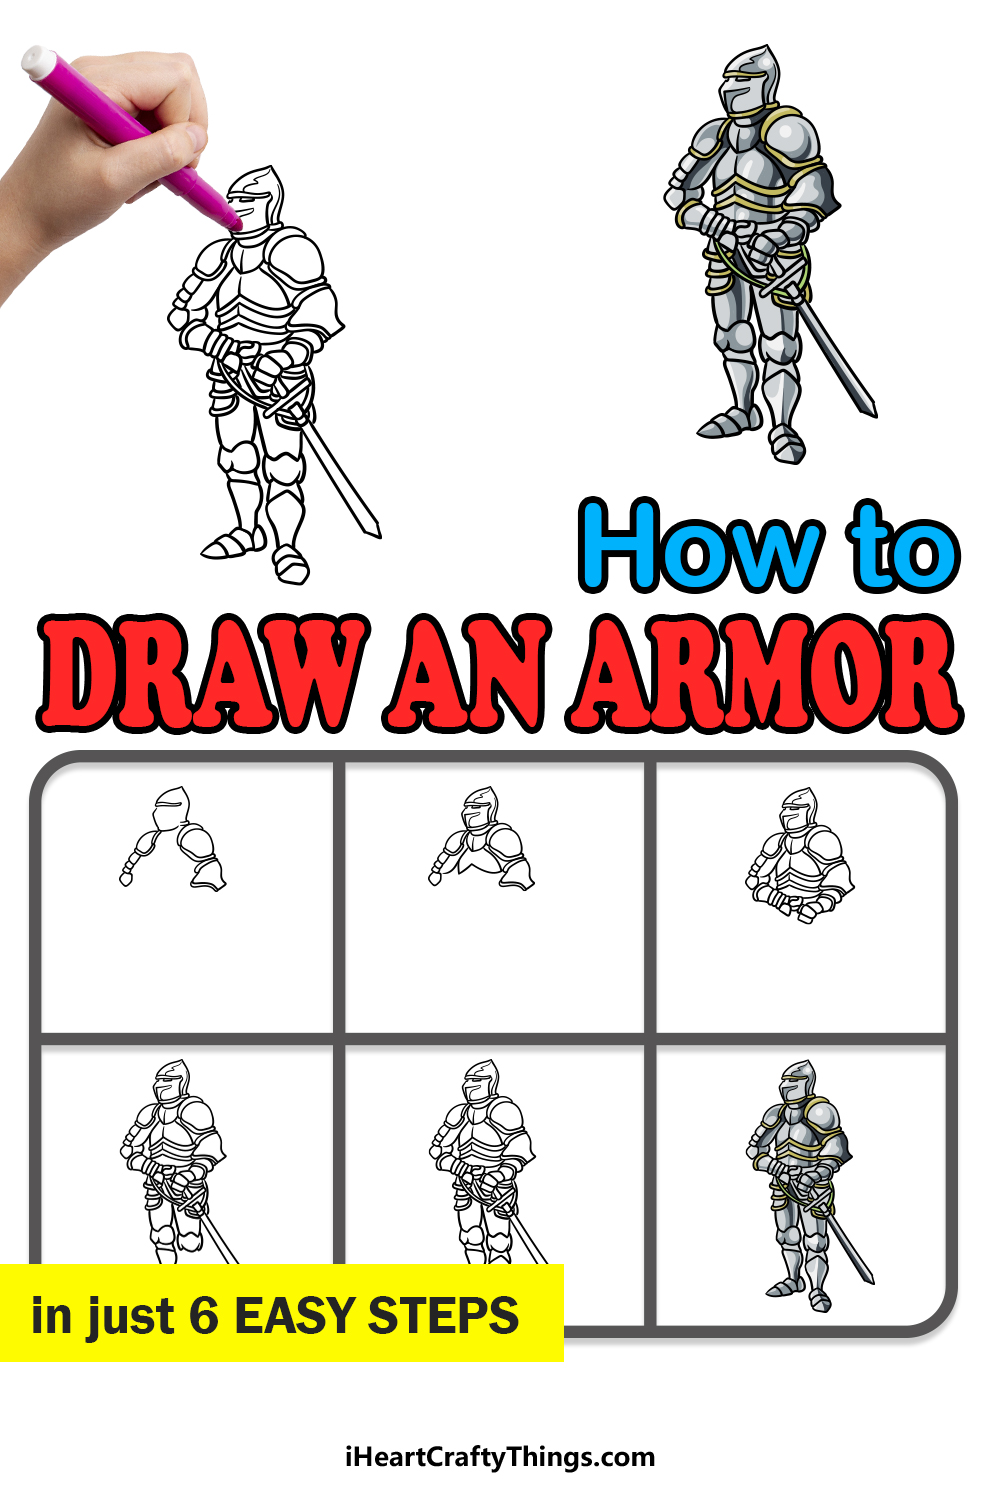 how to draw an armor in 6 easy steps